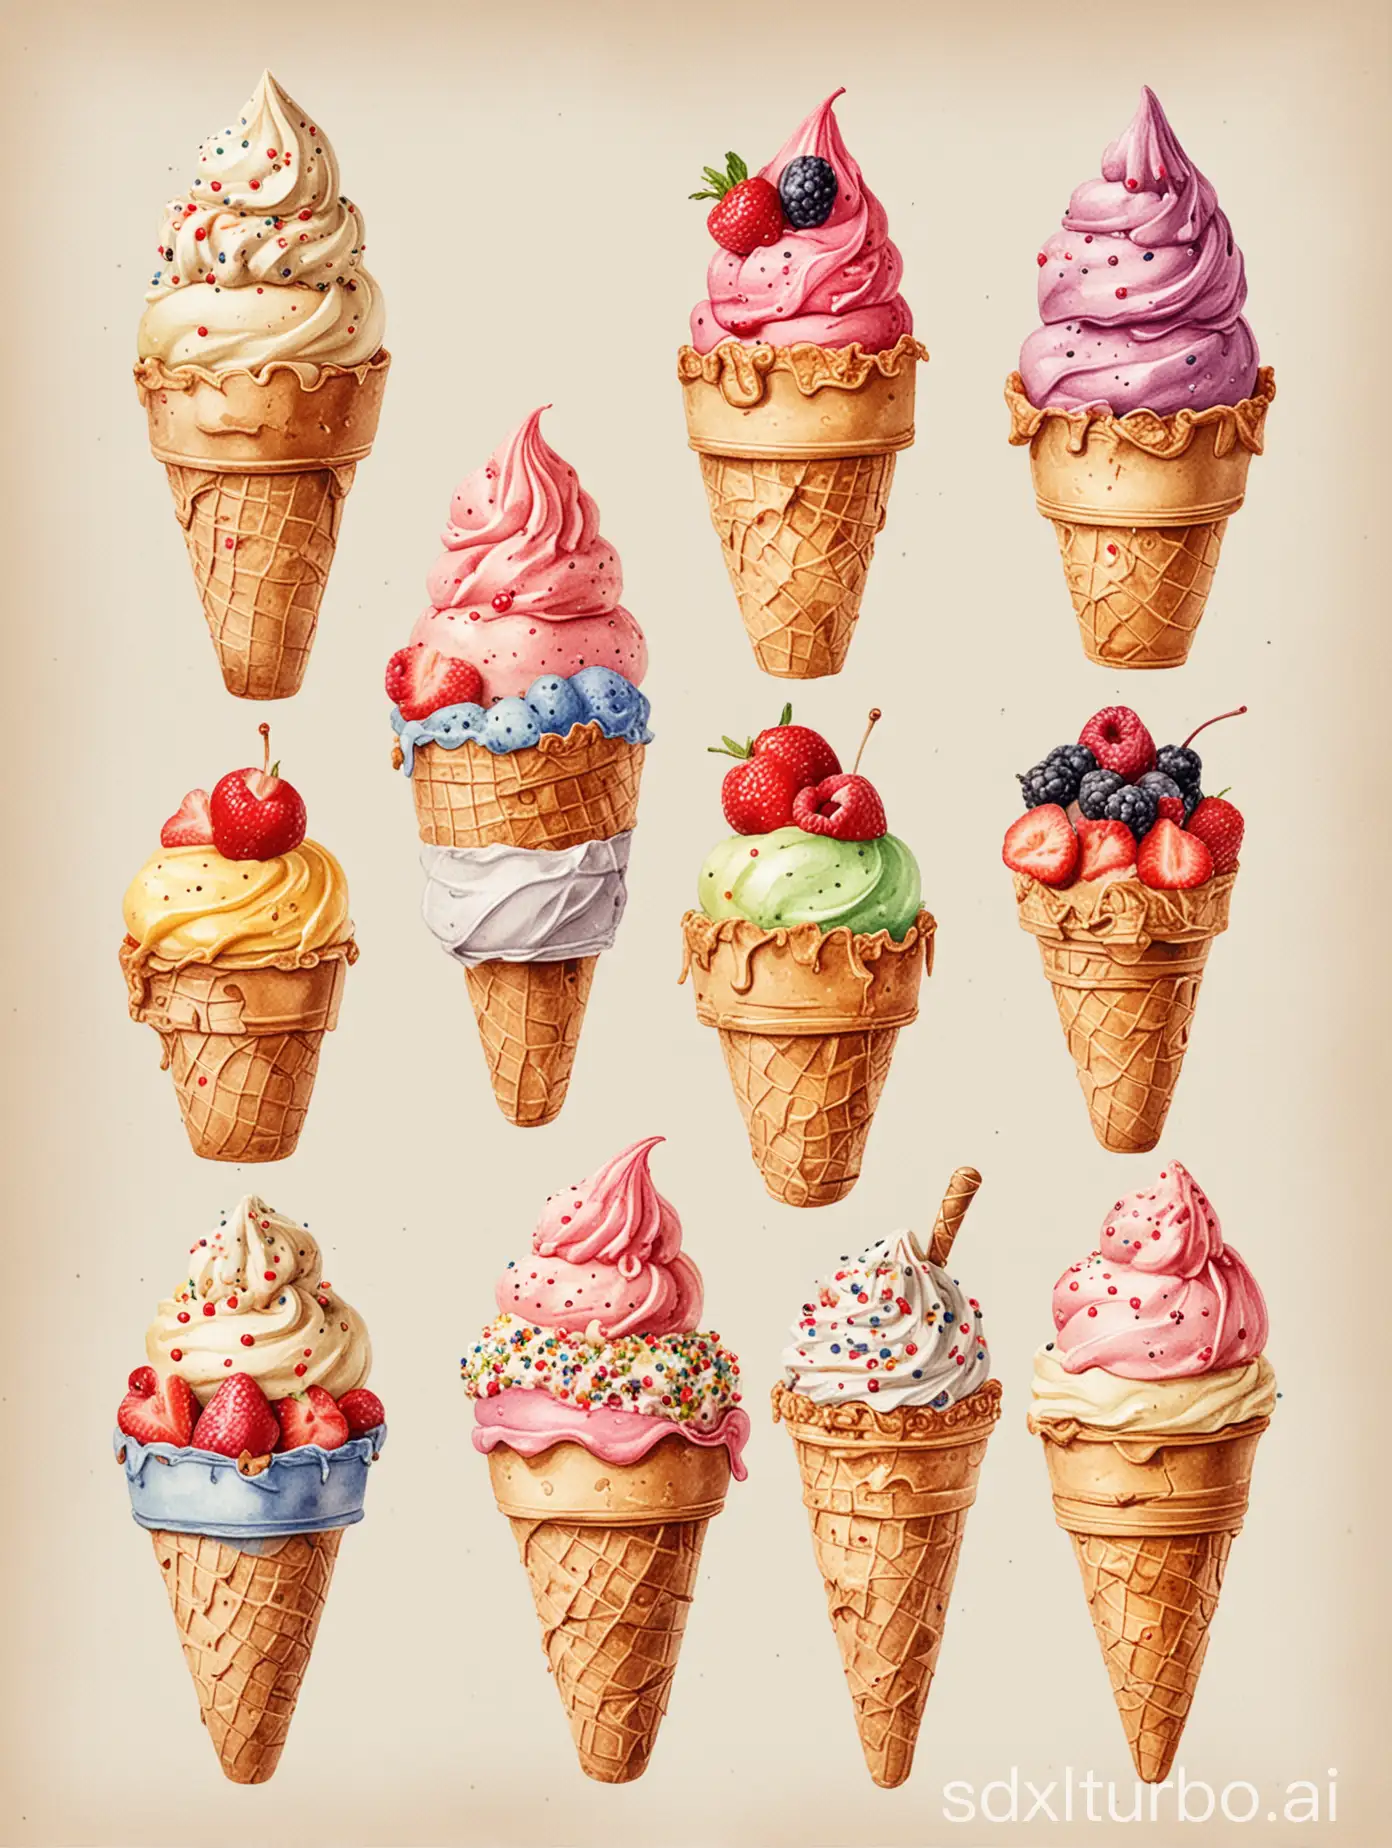 Watercolor clipart of Vintage ice creams, on white background --s 250 --niji 6  Each cone features a unique and delicious flavor of ice cream topped with delightful elements like fruits, sprinkles, and cookies, depicted in a charming illustration.